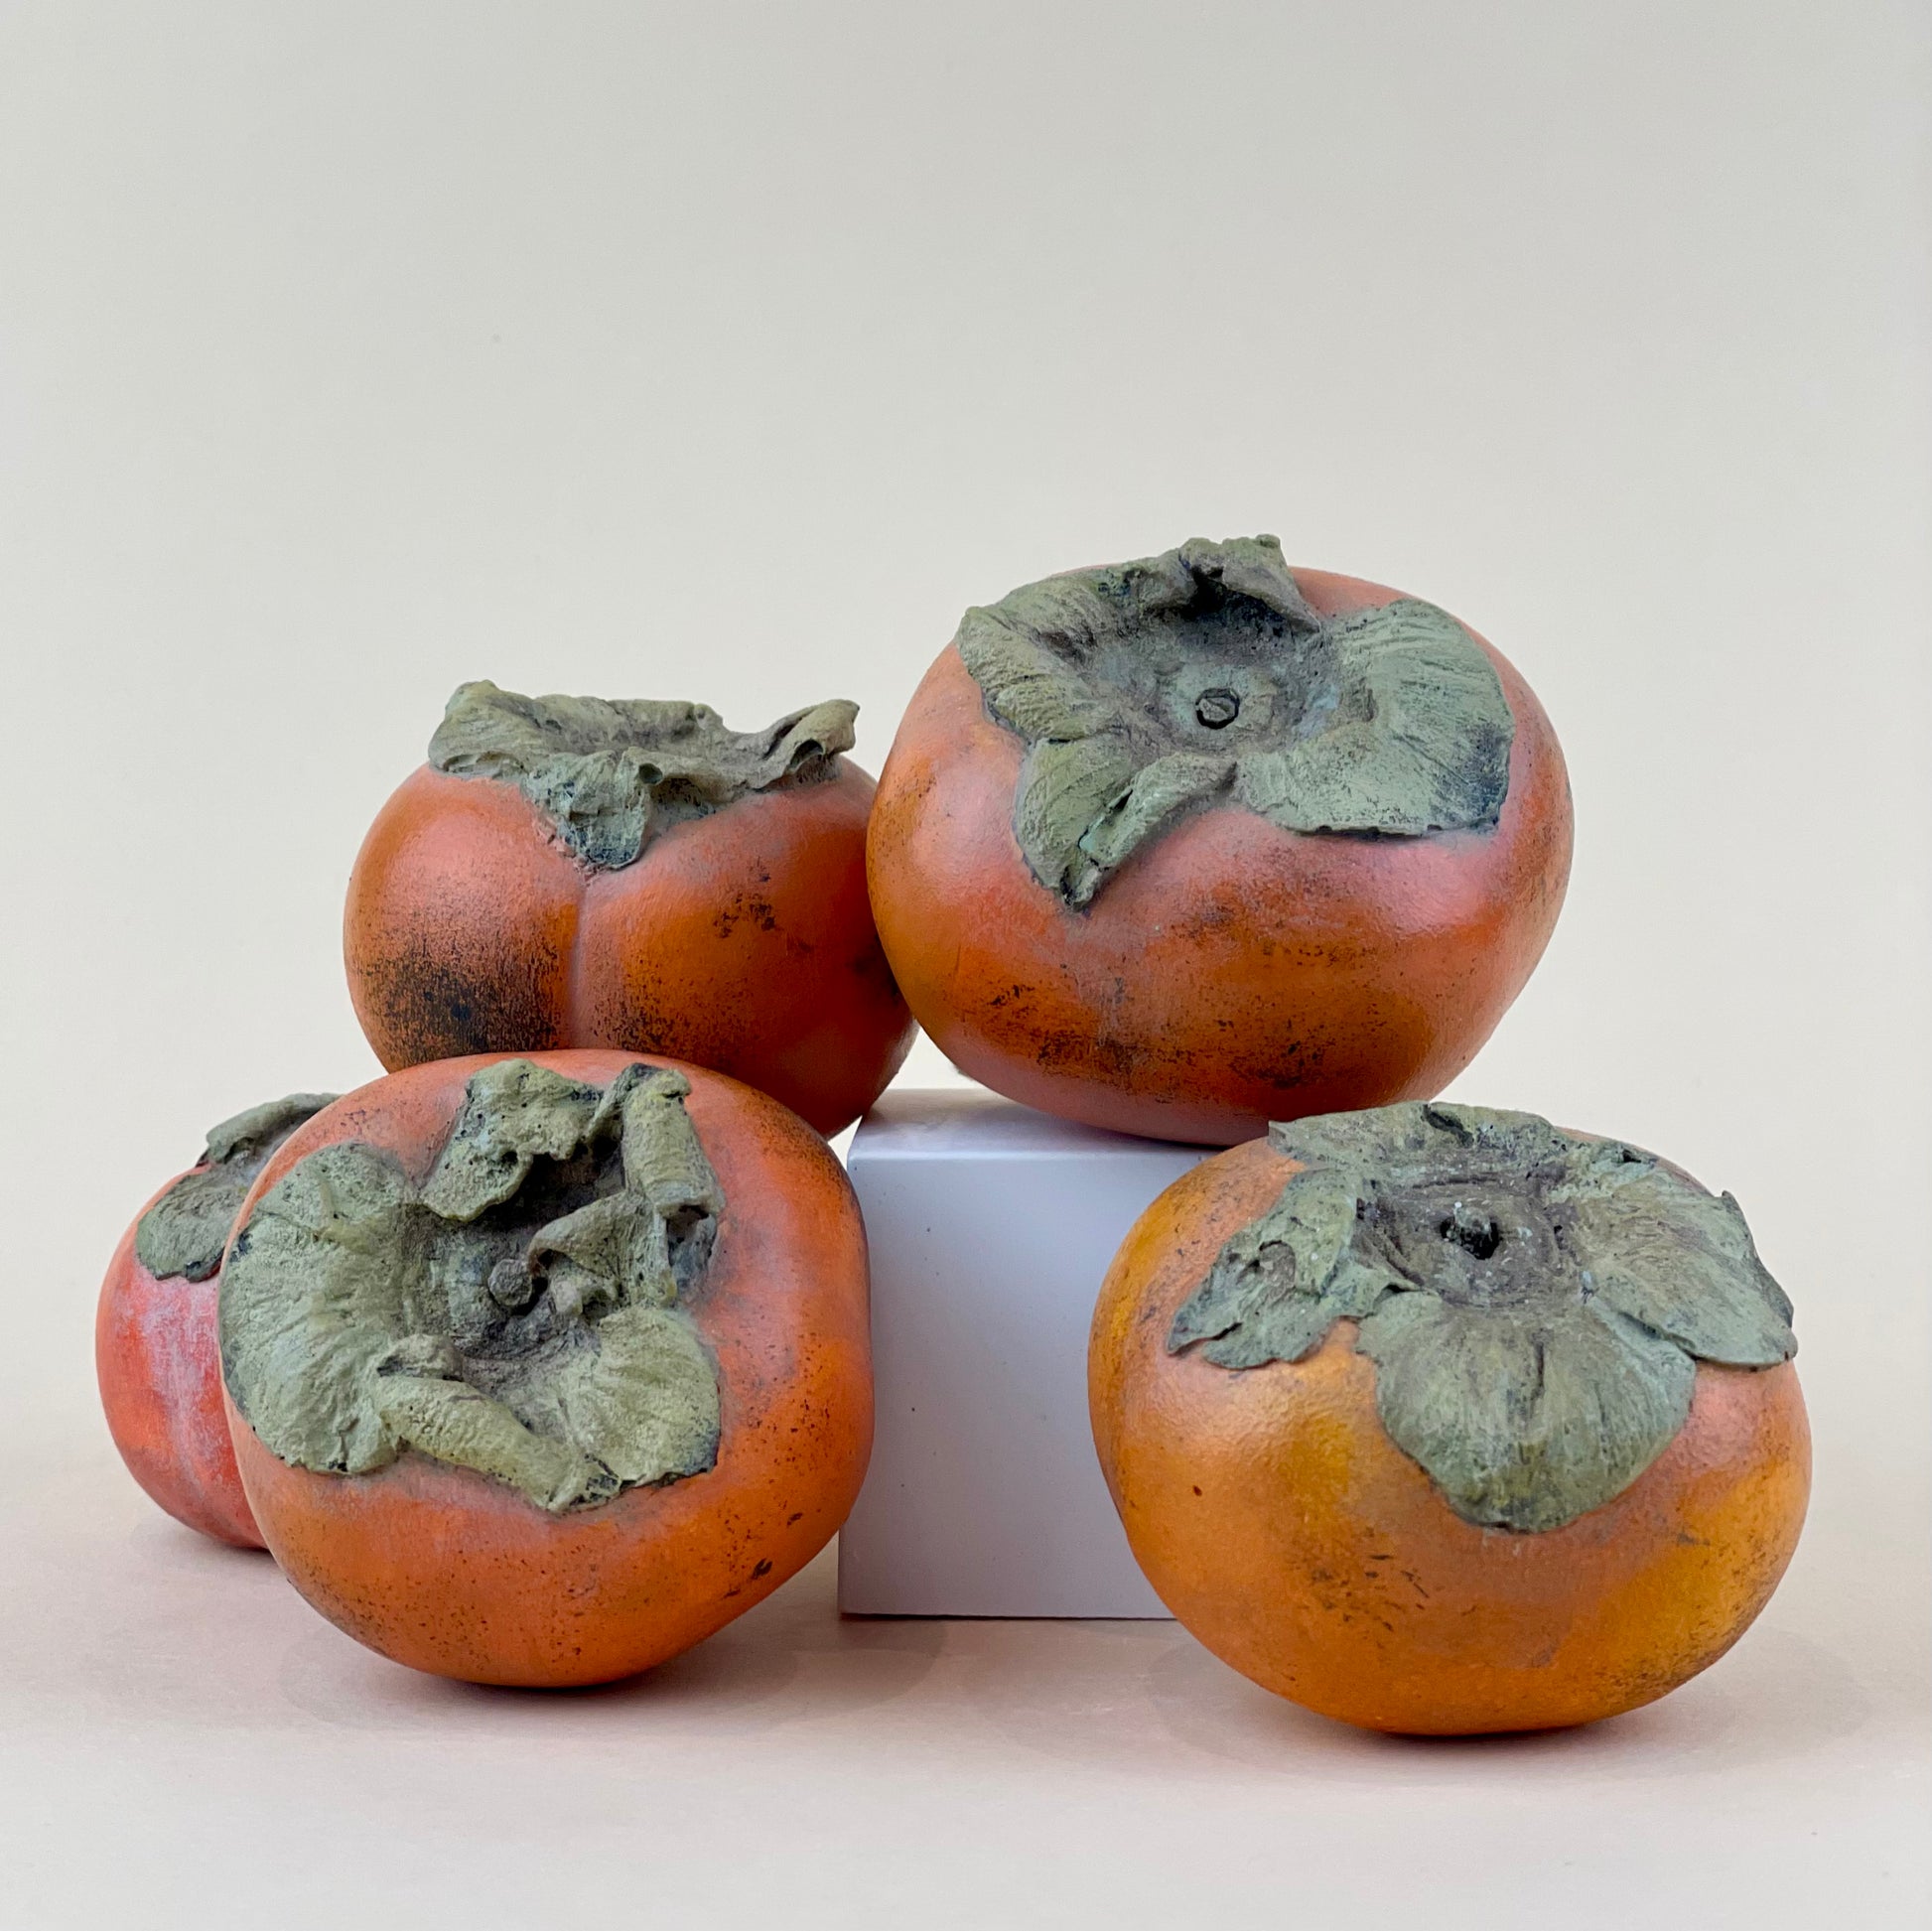 All About Persimmons and Persimmon Varieties